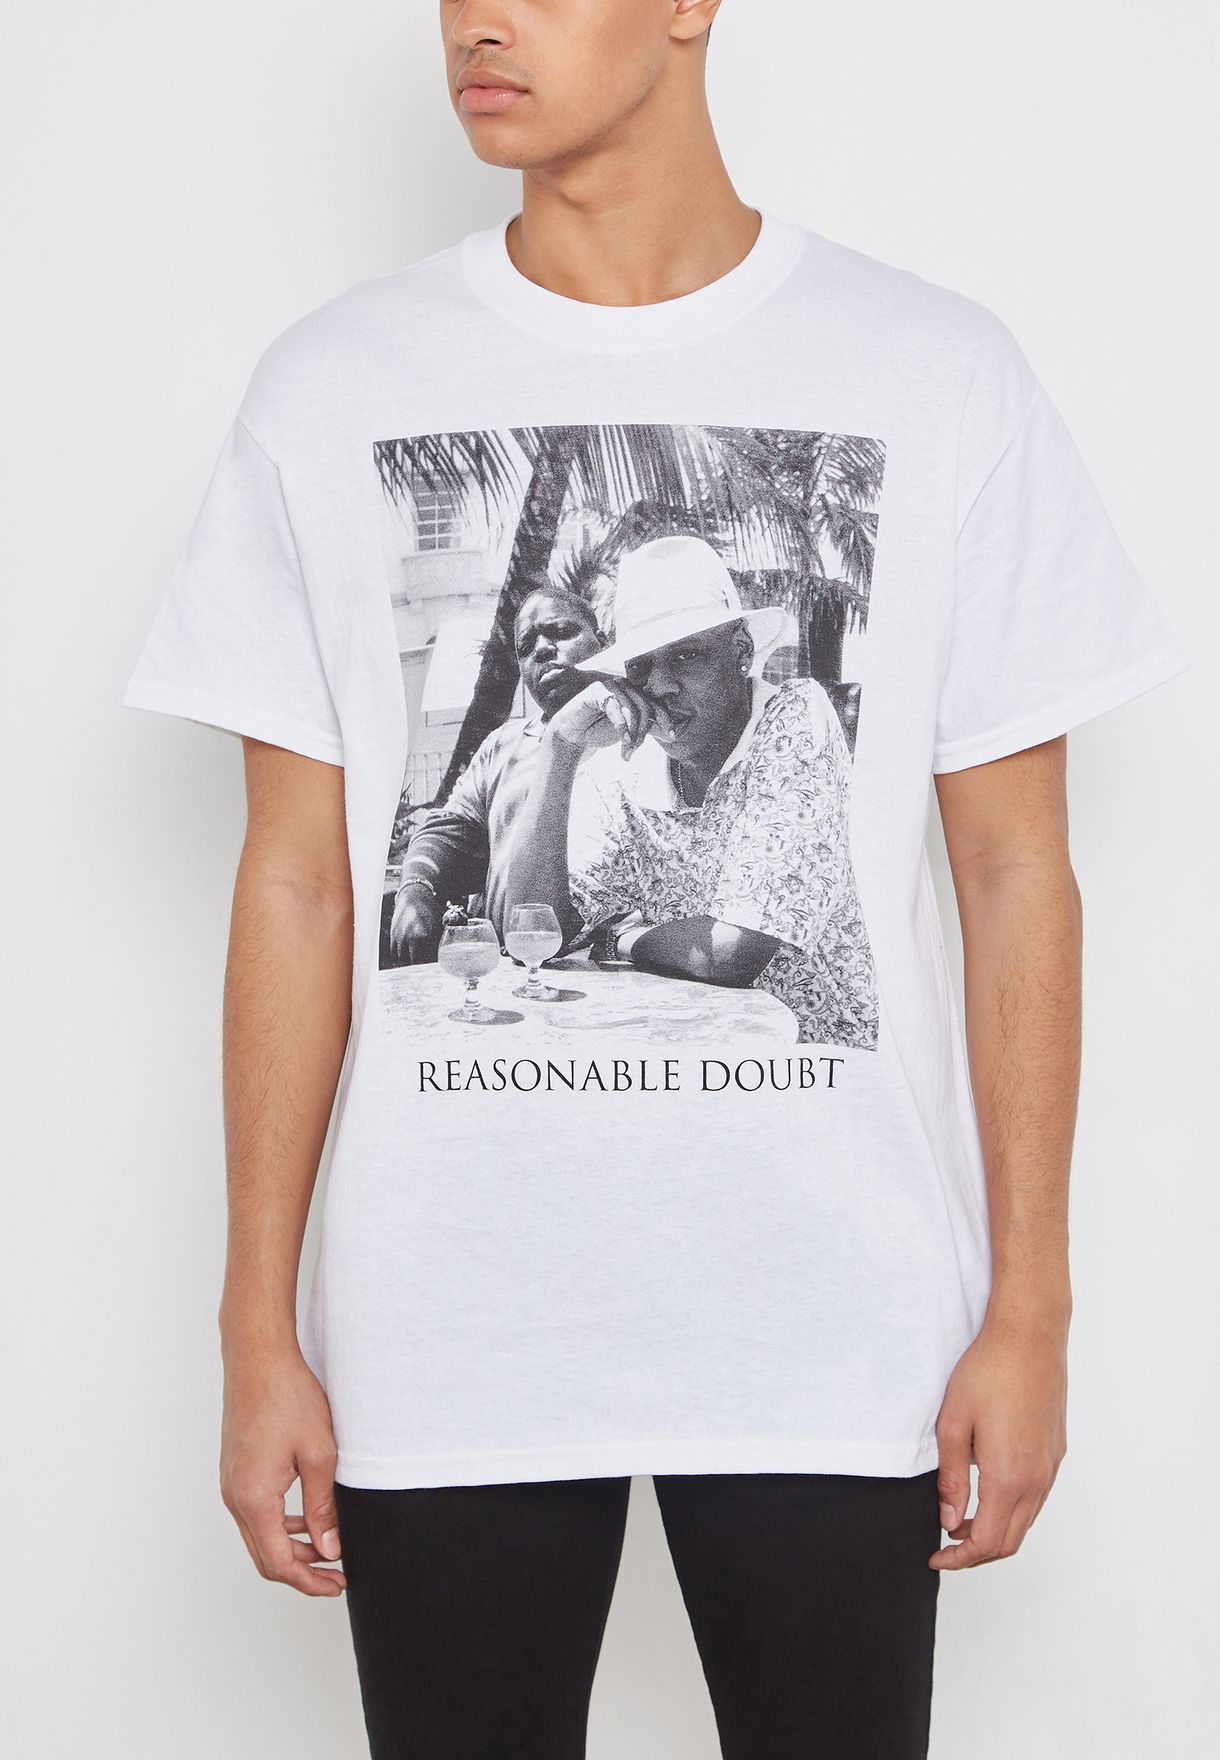 jay z and biggie t shirt